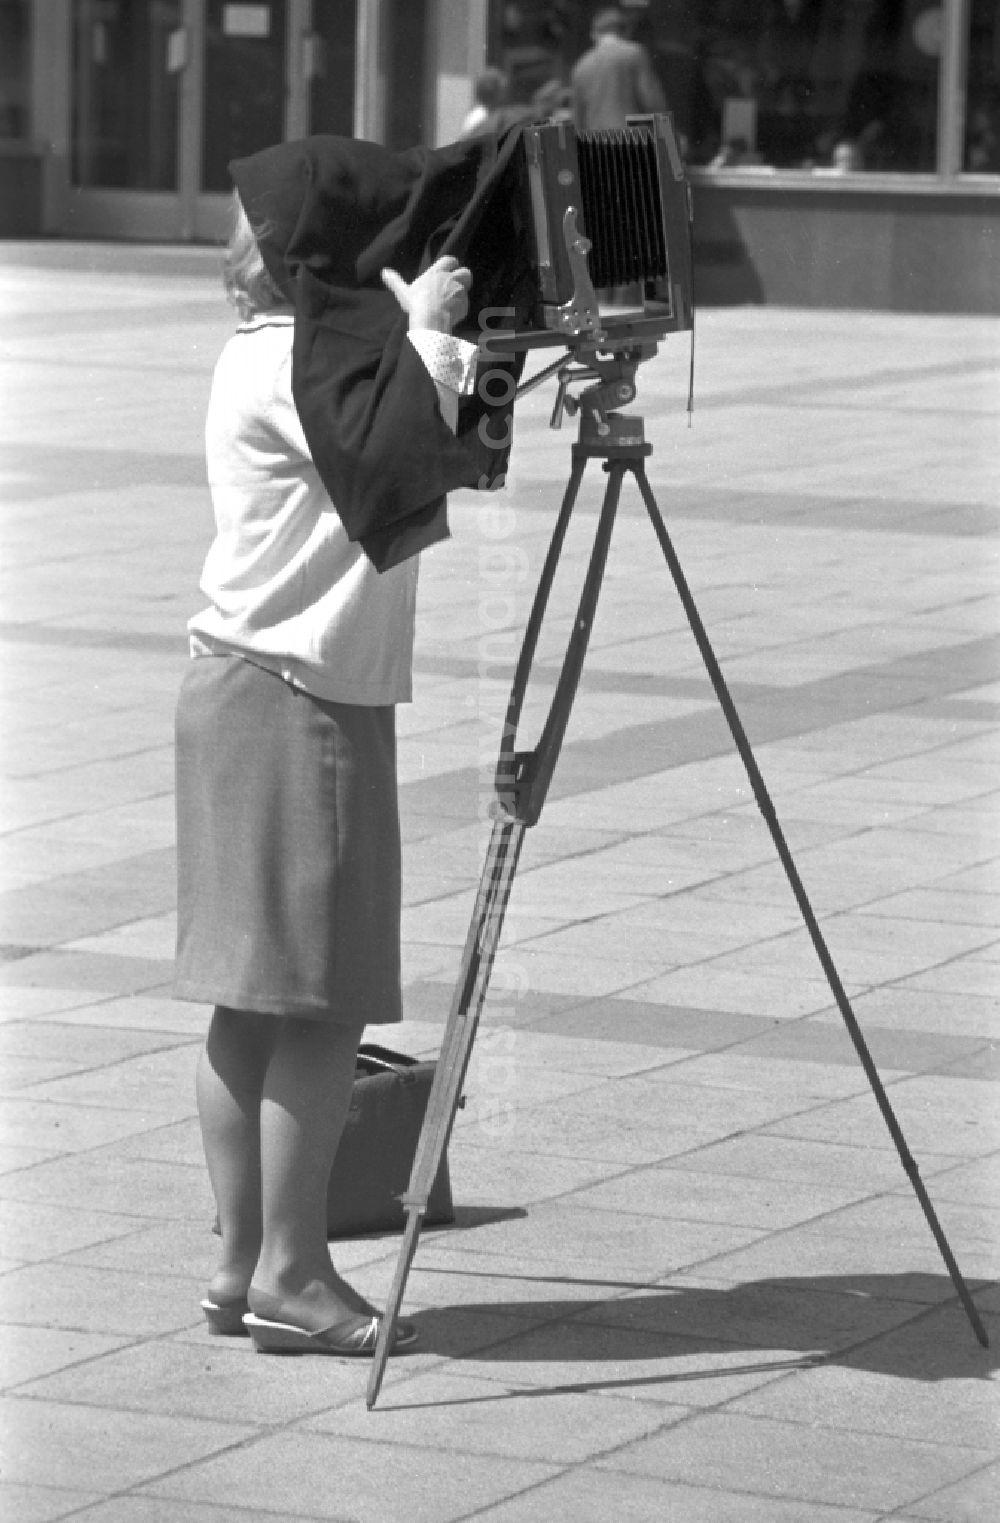 GDR image archive: Magdeburg - A woman photographed with a plate camera on a wooden tripod in Magdeburg